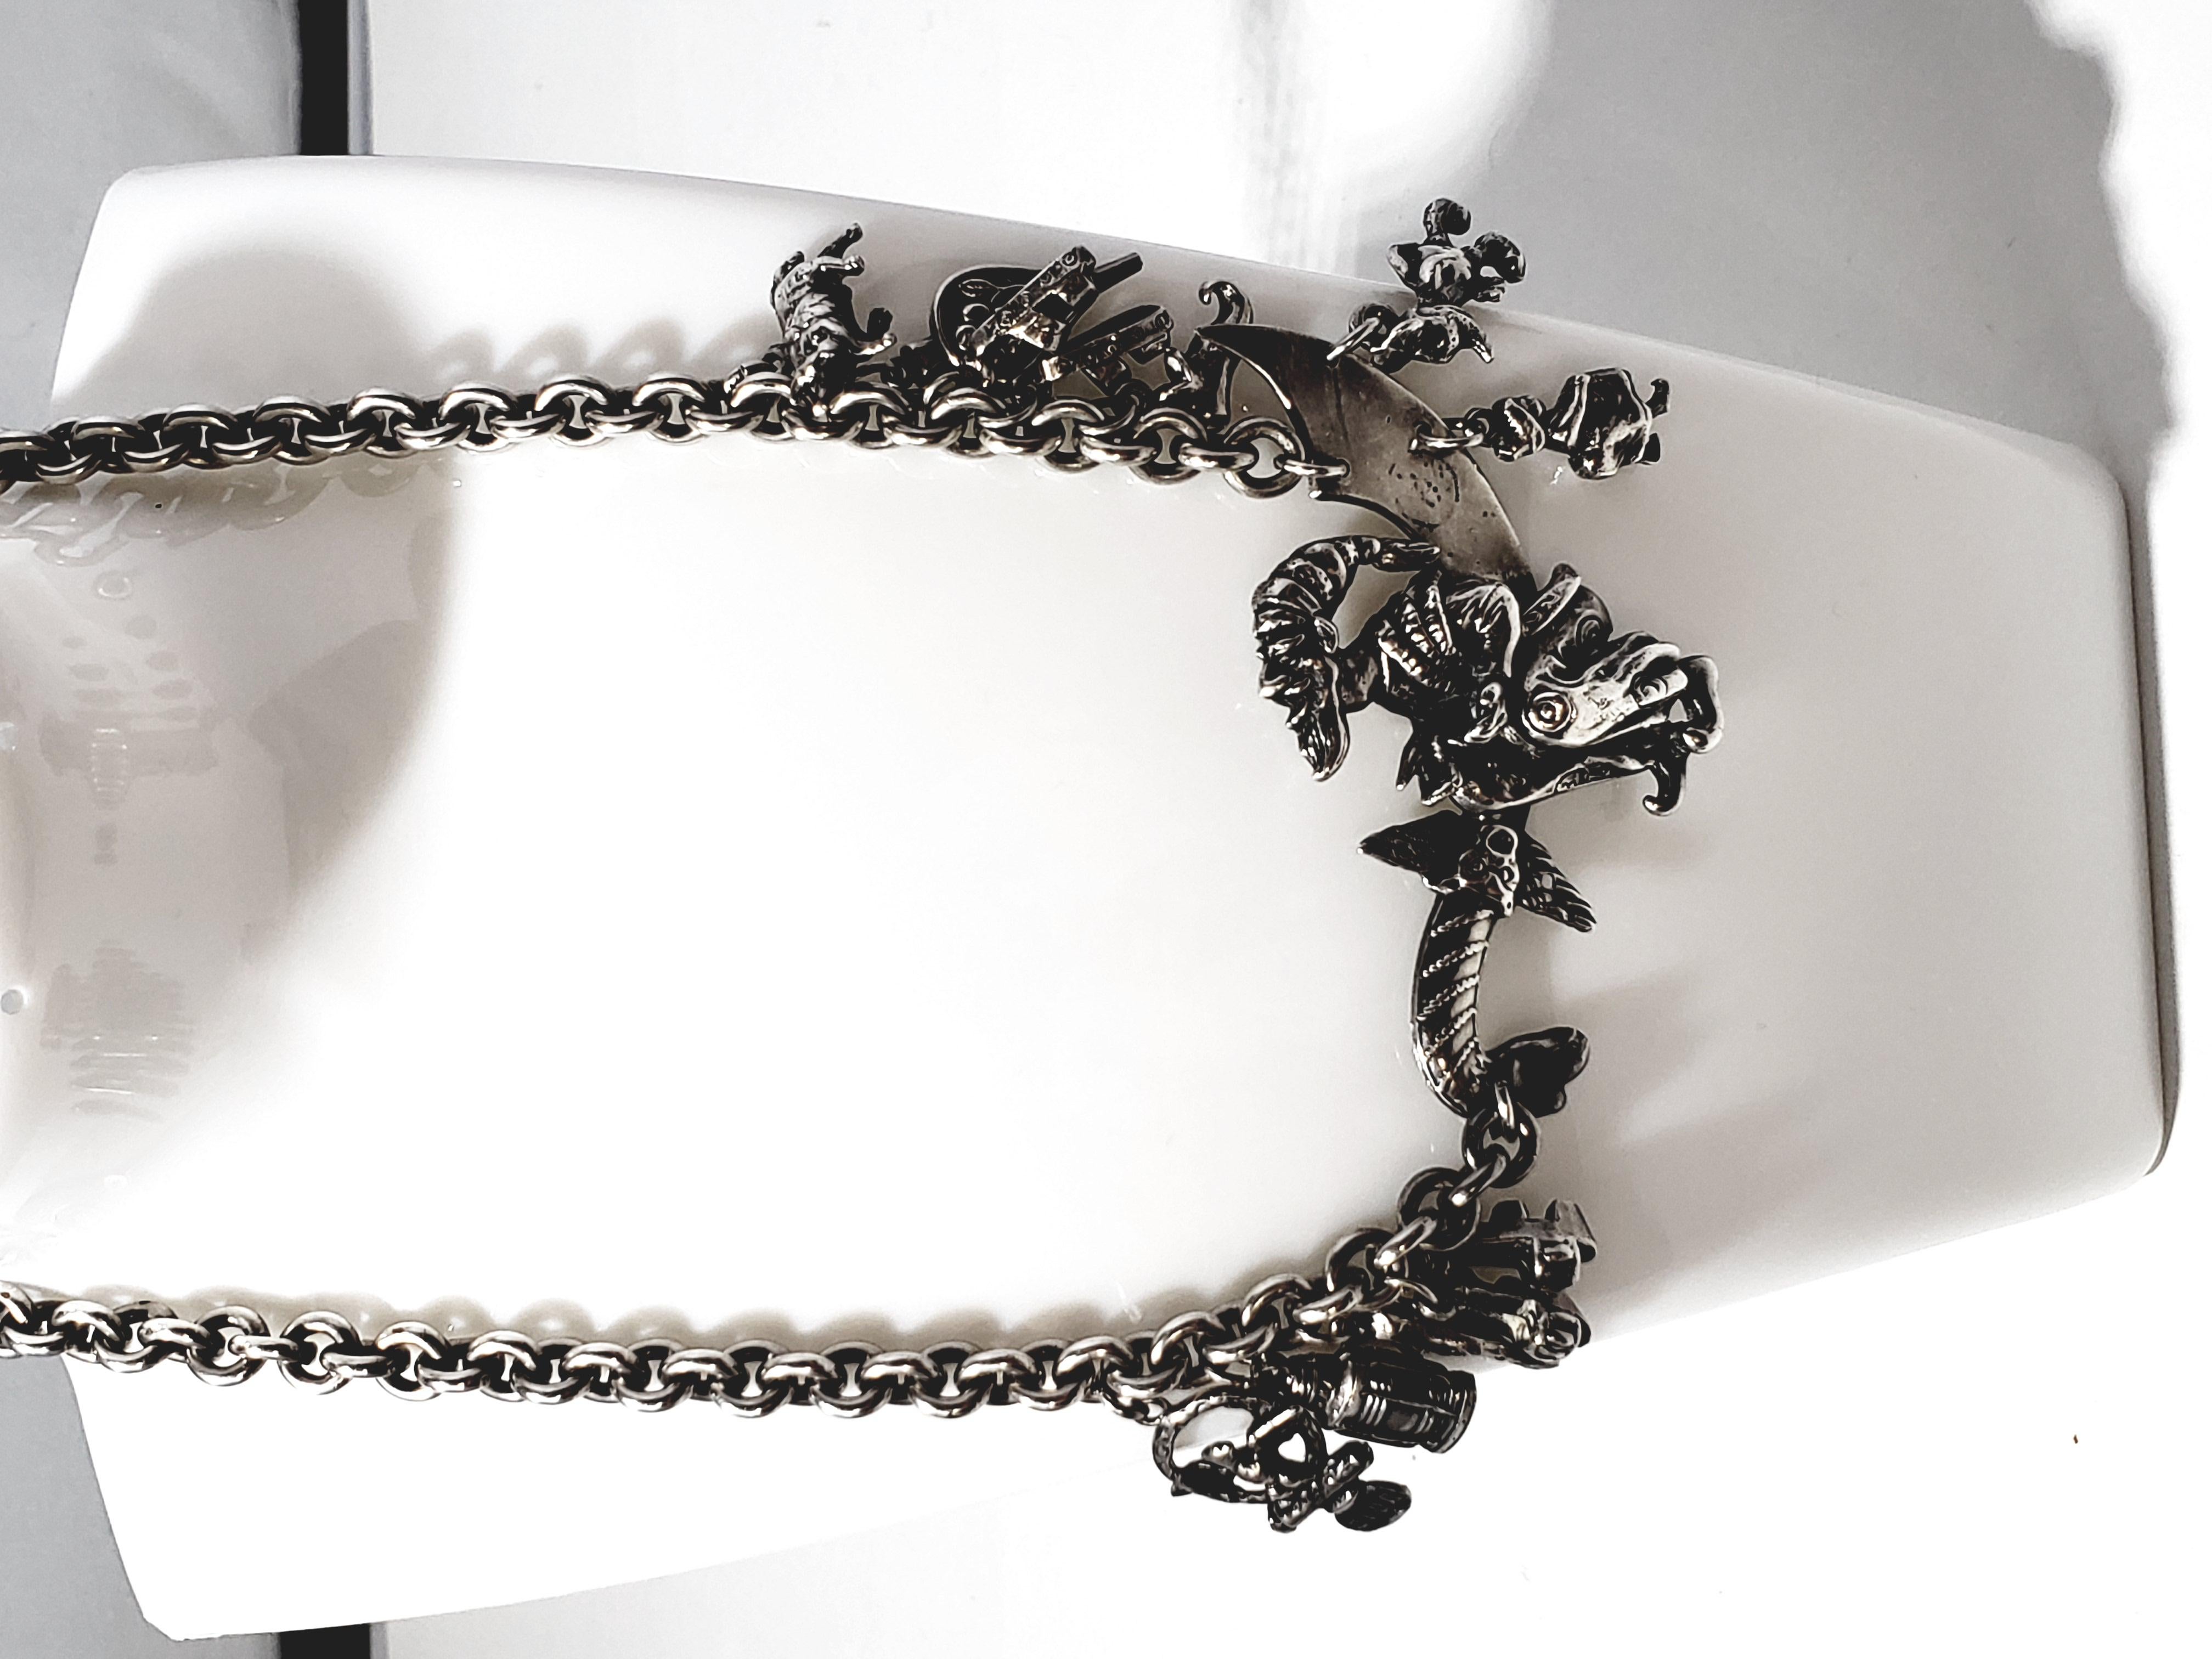 1940 Korda Thief of Bagdad Charm Choker Necklace

An incredibly detailed piece from the 1940’s by famed jeweler, Korda.  This sturdy chain features dangling charms. The central piece is the Thief of Baghdad, perched on a dragon-headed ornate